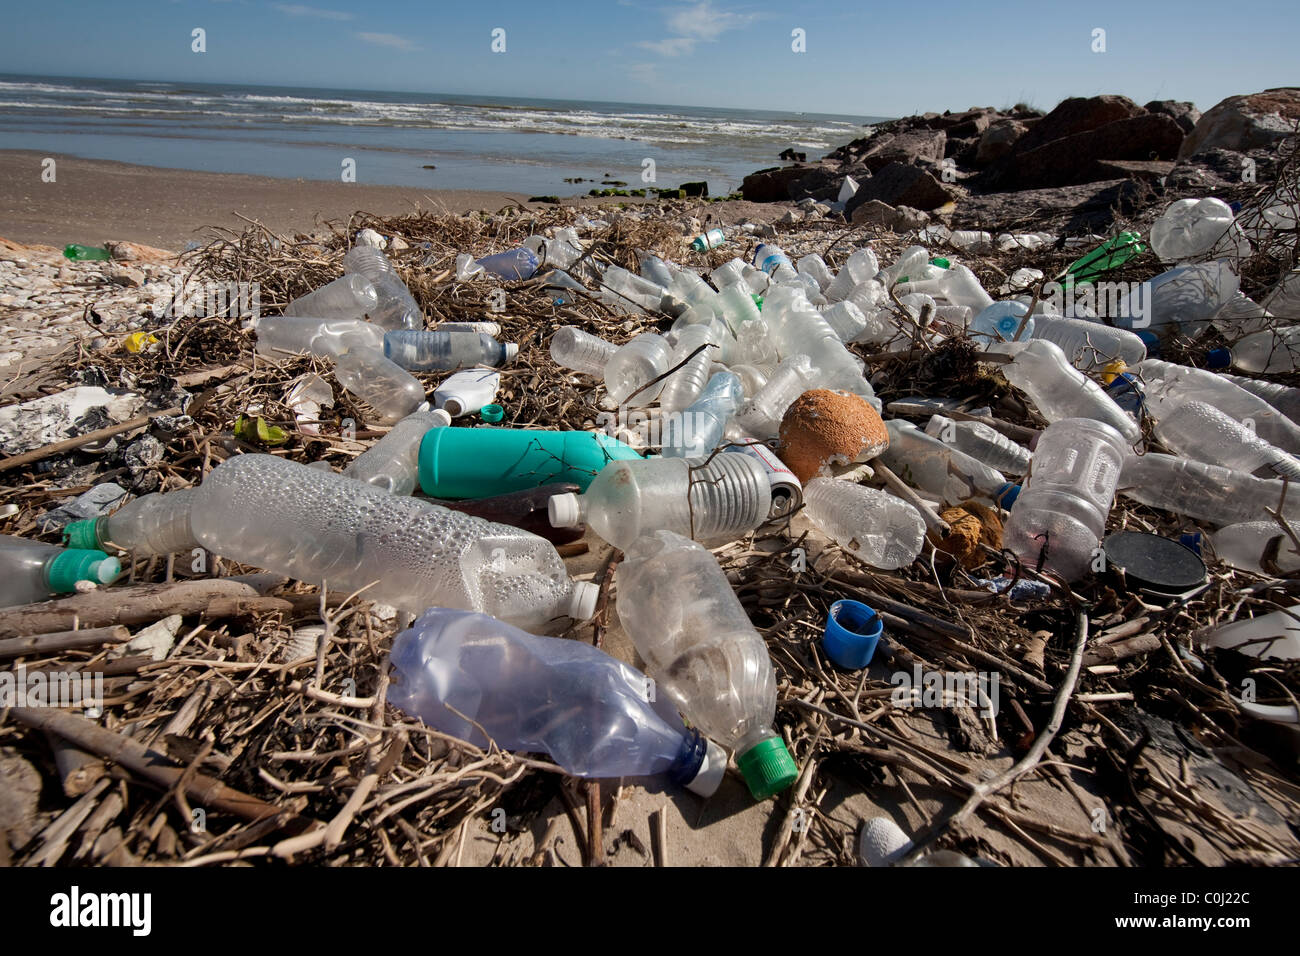 Plastic bottles litter the beach on an isolated part of South Padre Island on the Gulf of Mexico near Port Mansfield, Texas Stock Photo